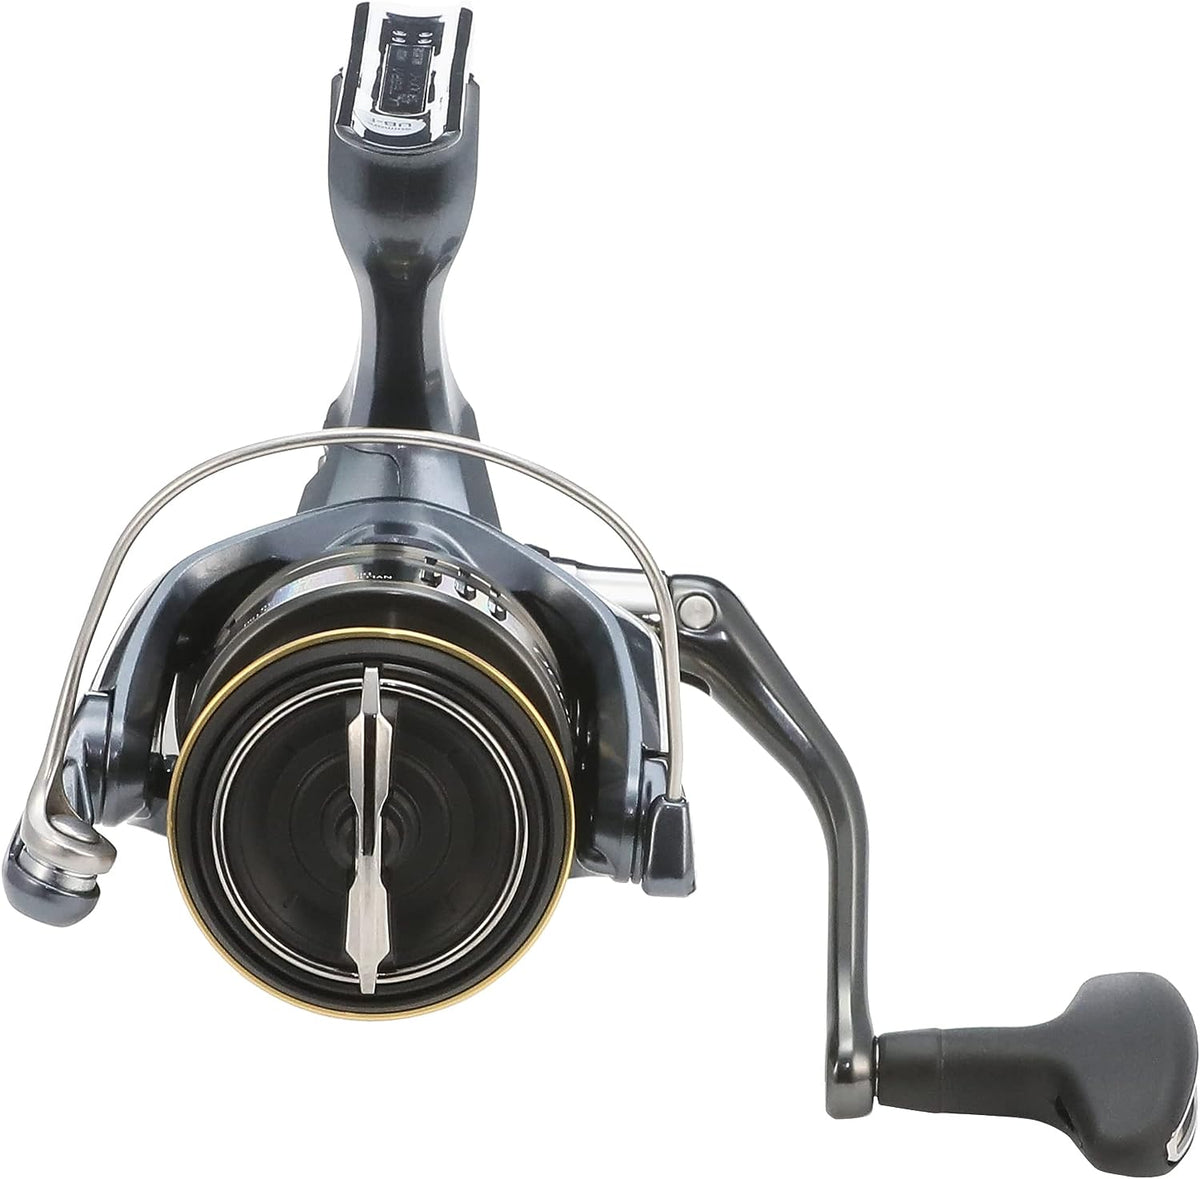 Shimano 21 ULTEGRA C3000 Spinning Reel – EX TOOLS JAPAN, High quality tools  from Japan